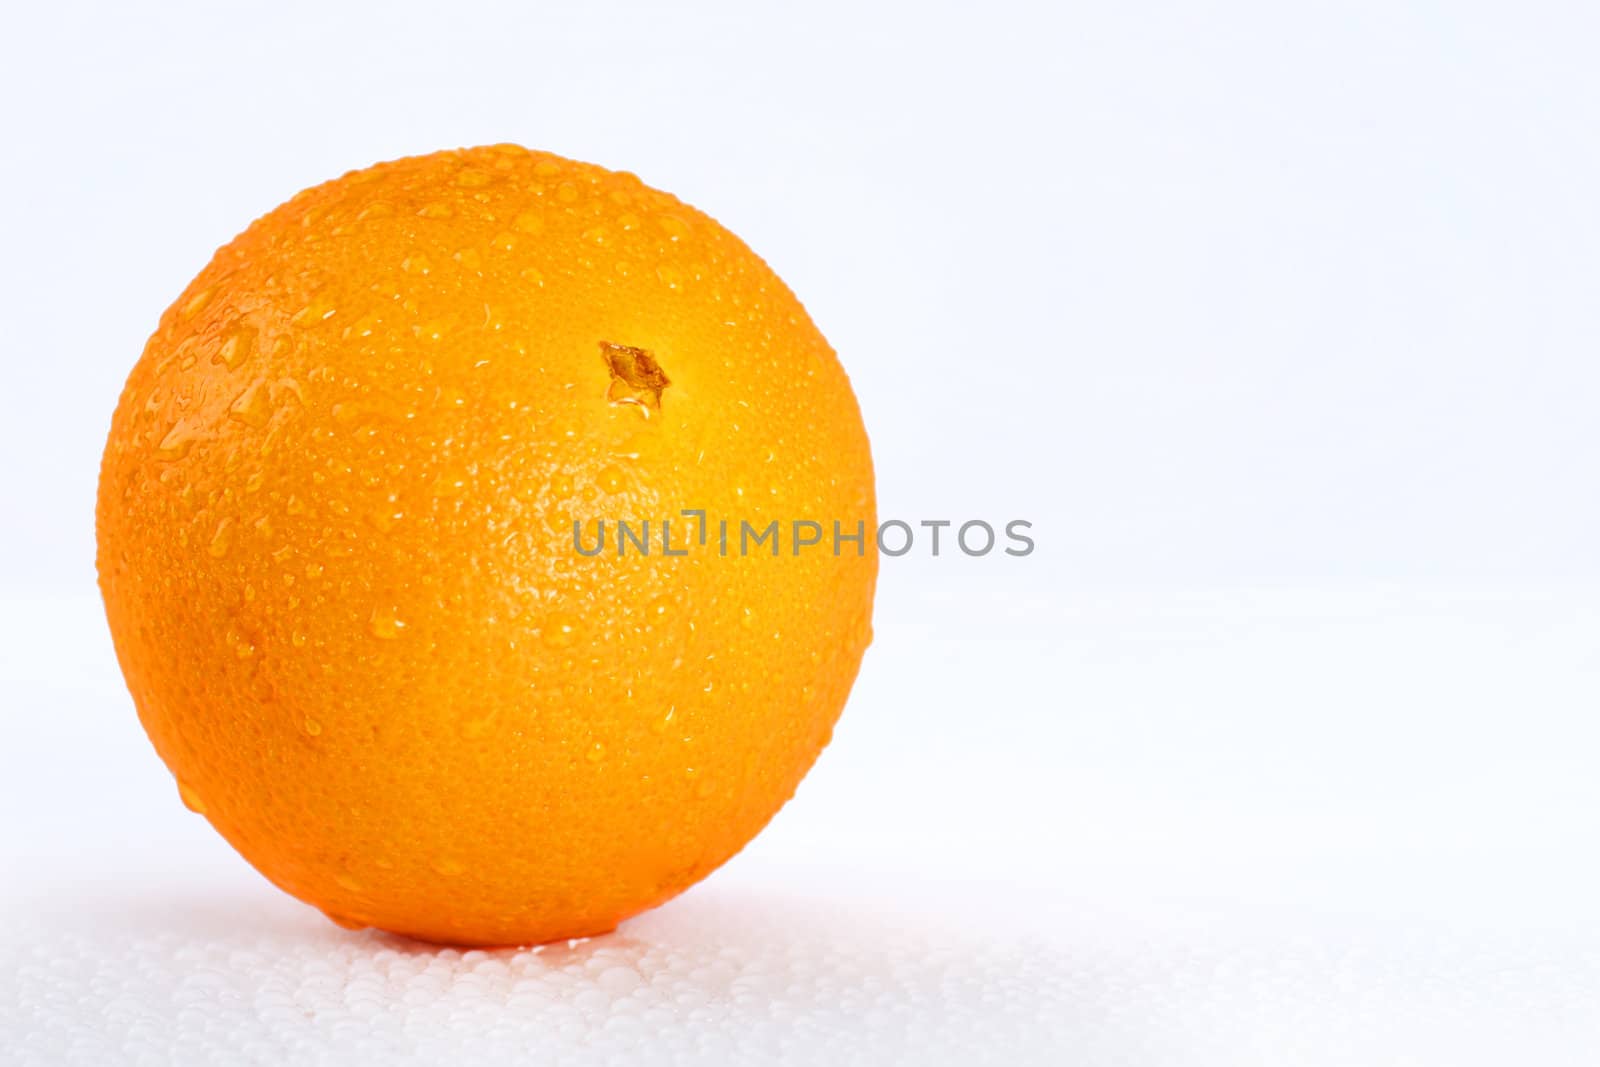 Beautiful studio shot of a fresh and wet orange looking delicious, with water droplets dripping off it over white, perfect nutrition or diet background.